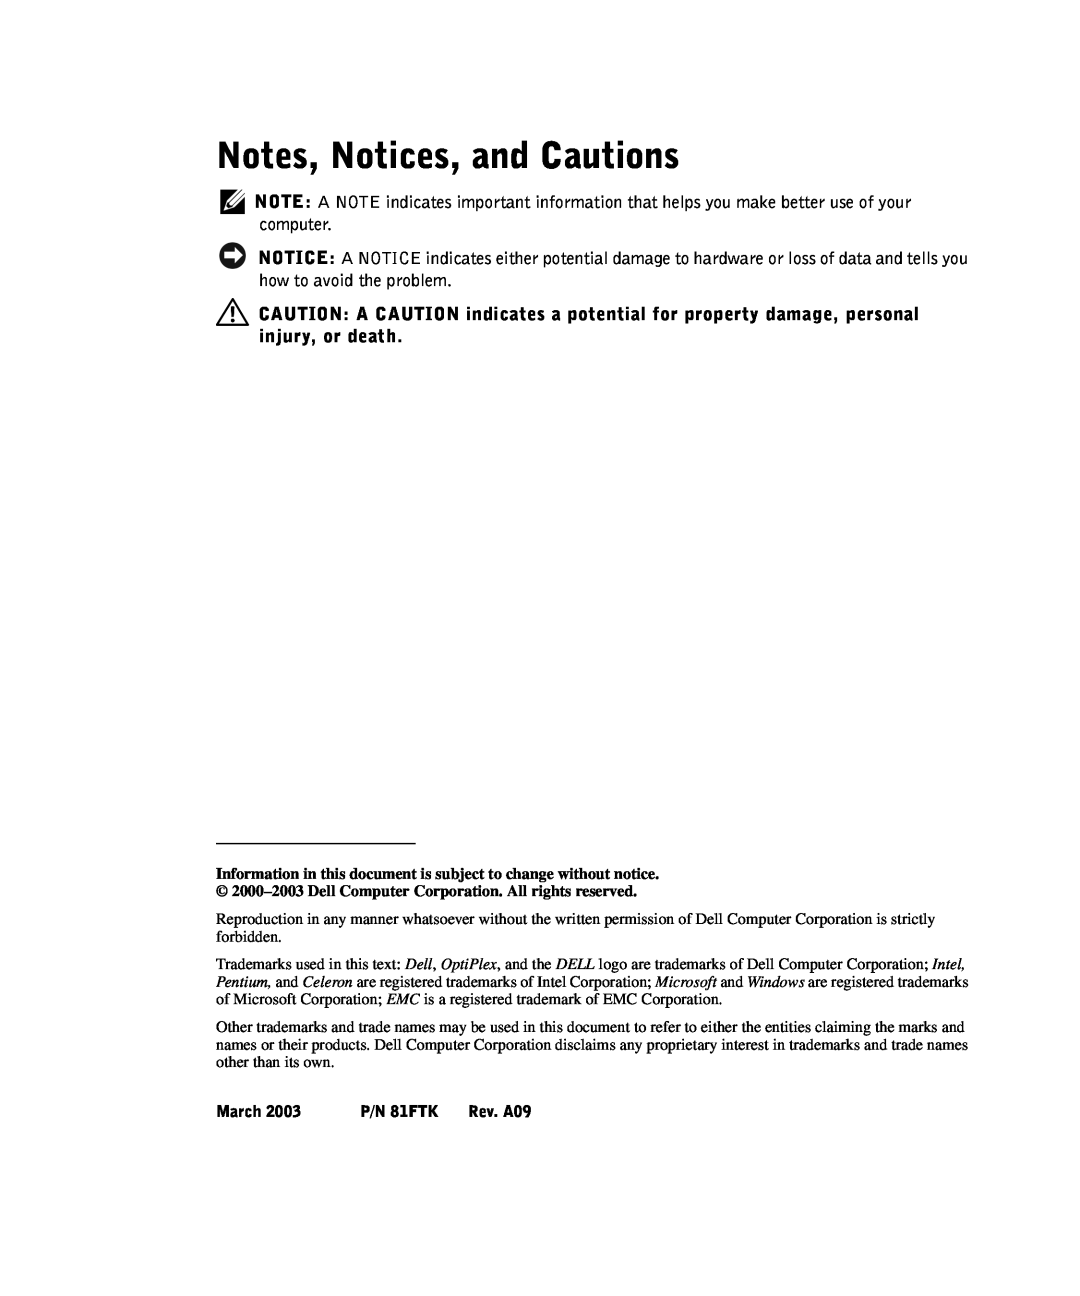 Dell manual Notes, Notices, and Cautions, March, P/N 81FTK 